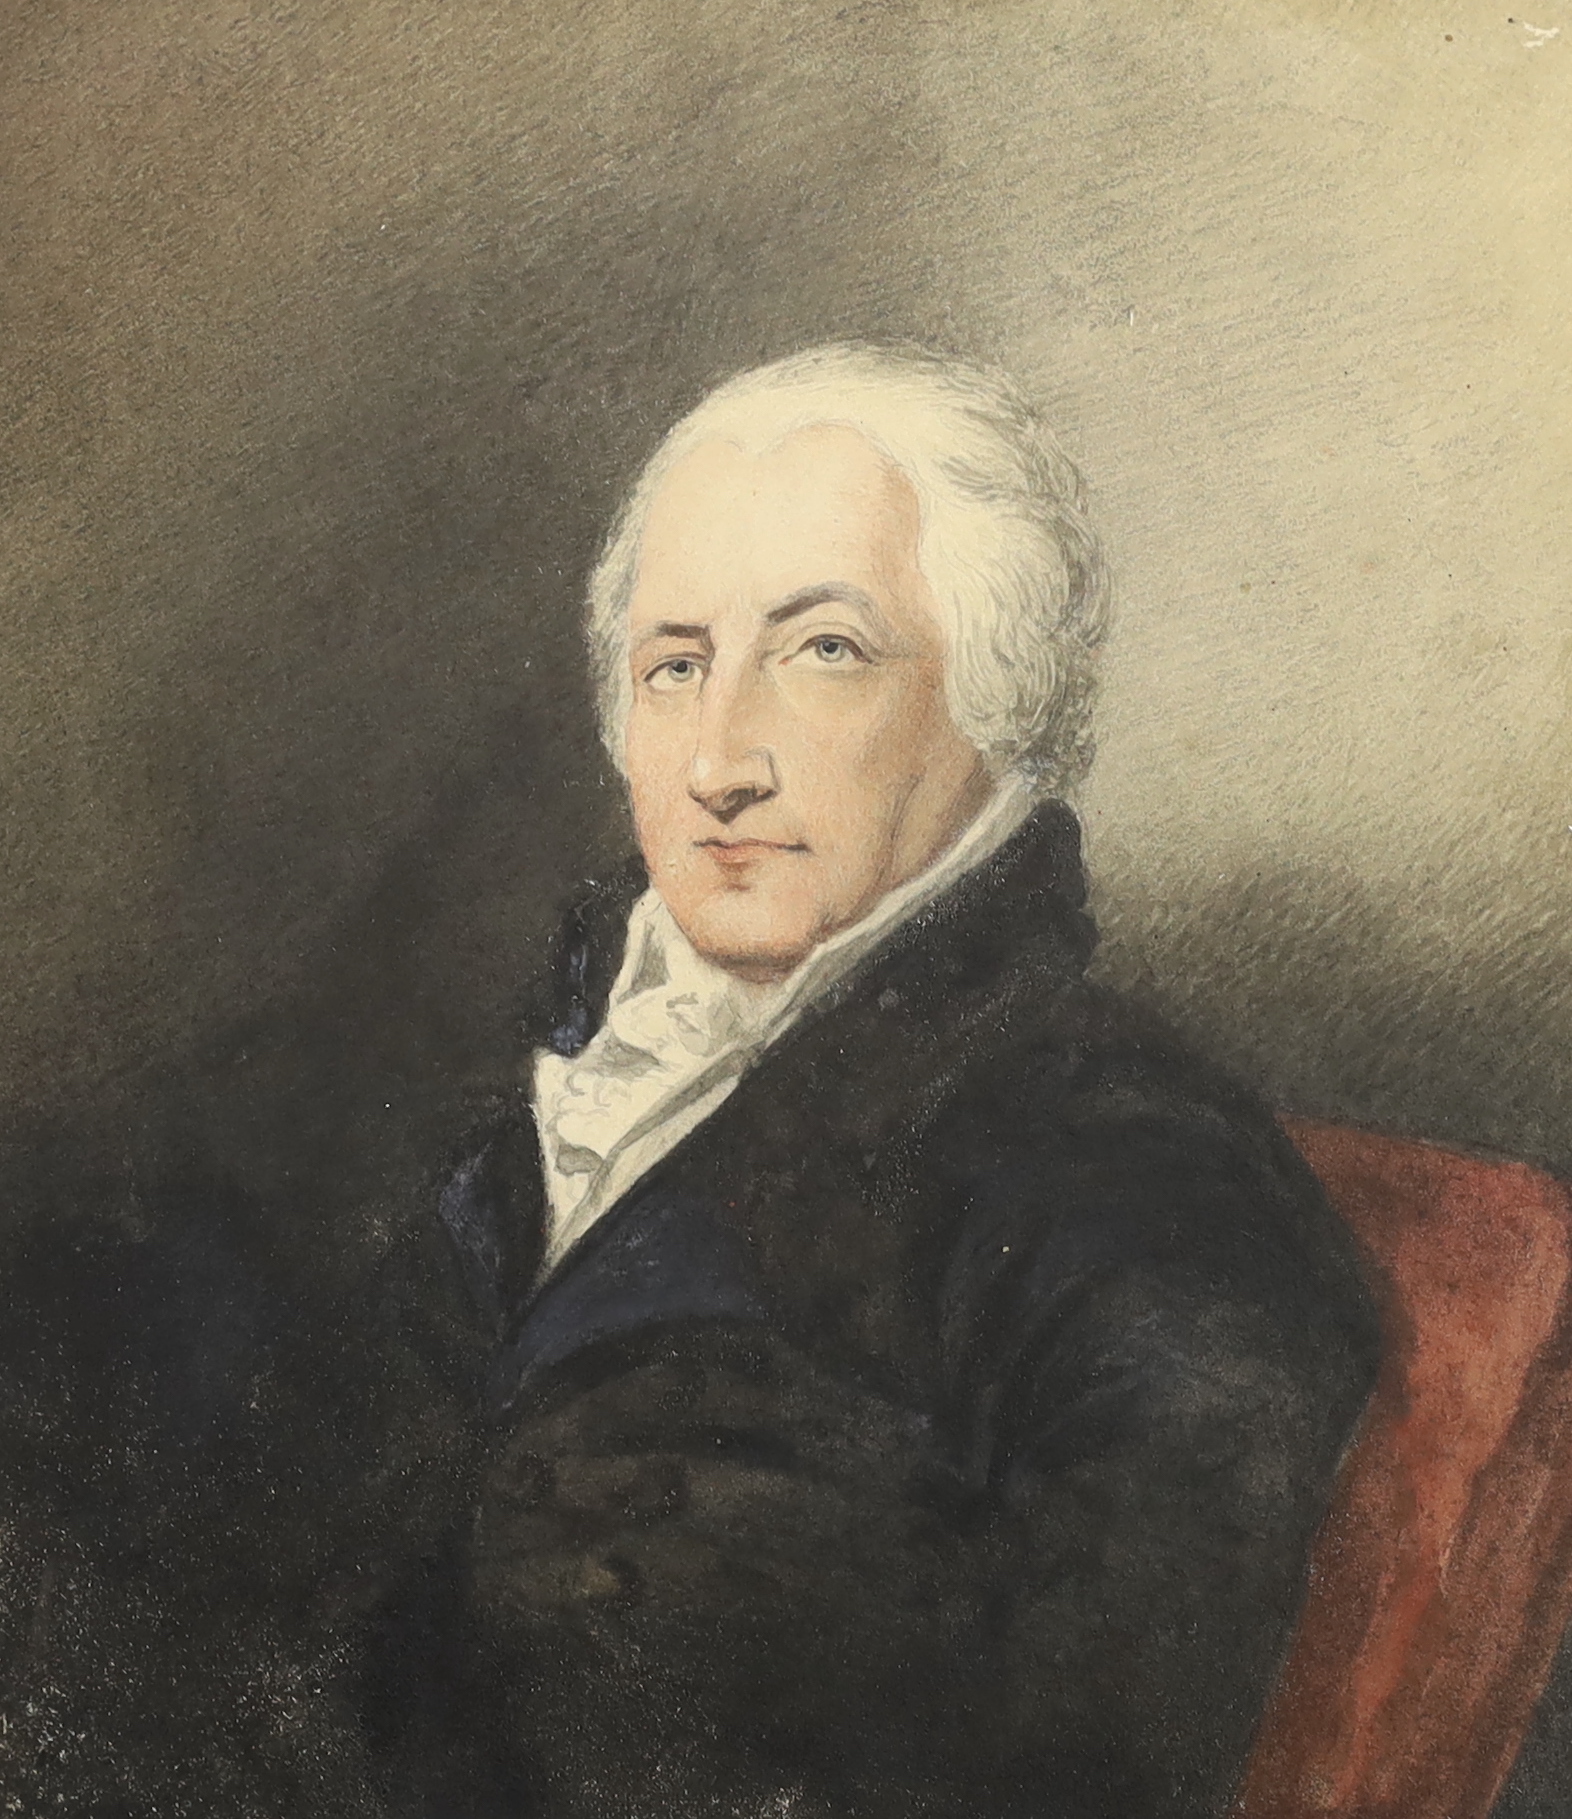 Late 18th century English School - Portrait of Sir William Eden, later 1st Baron Auckland, watercolour on card, 20 x 18cm. A sketch of the sitter verso.